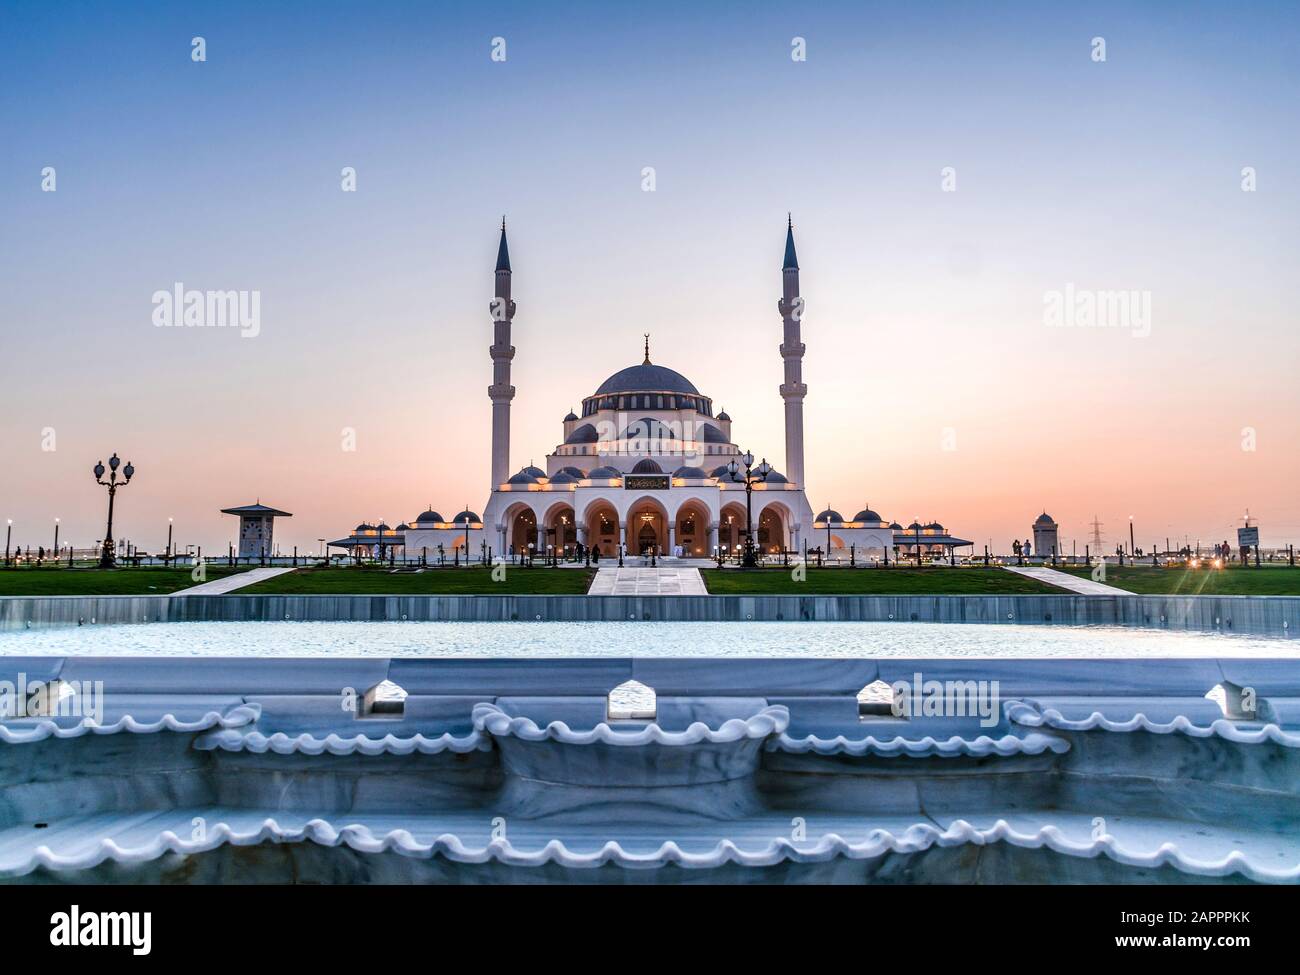 Sharjah Mosque Largest Mosque in United Arab Emirates Place to visit in Sharjah, Amazing architecture mosque in the world, Dubai travel and tourism Stock Photo